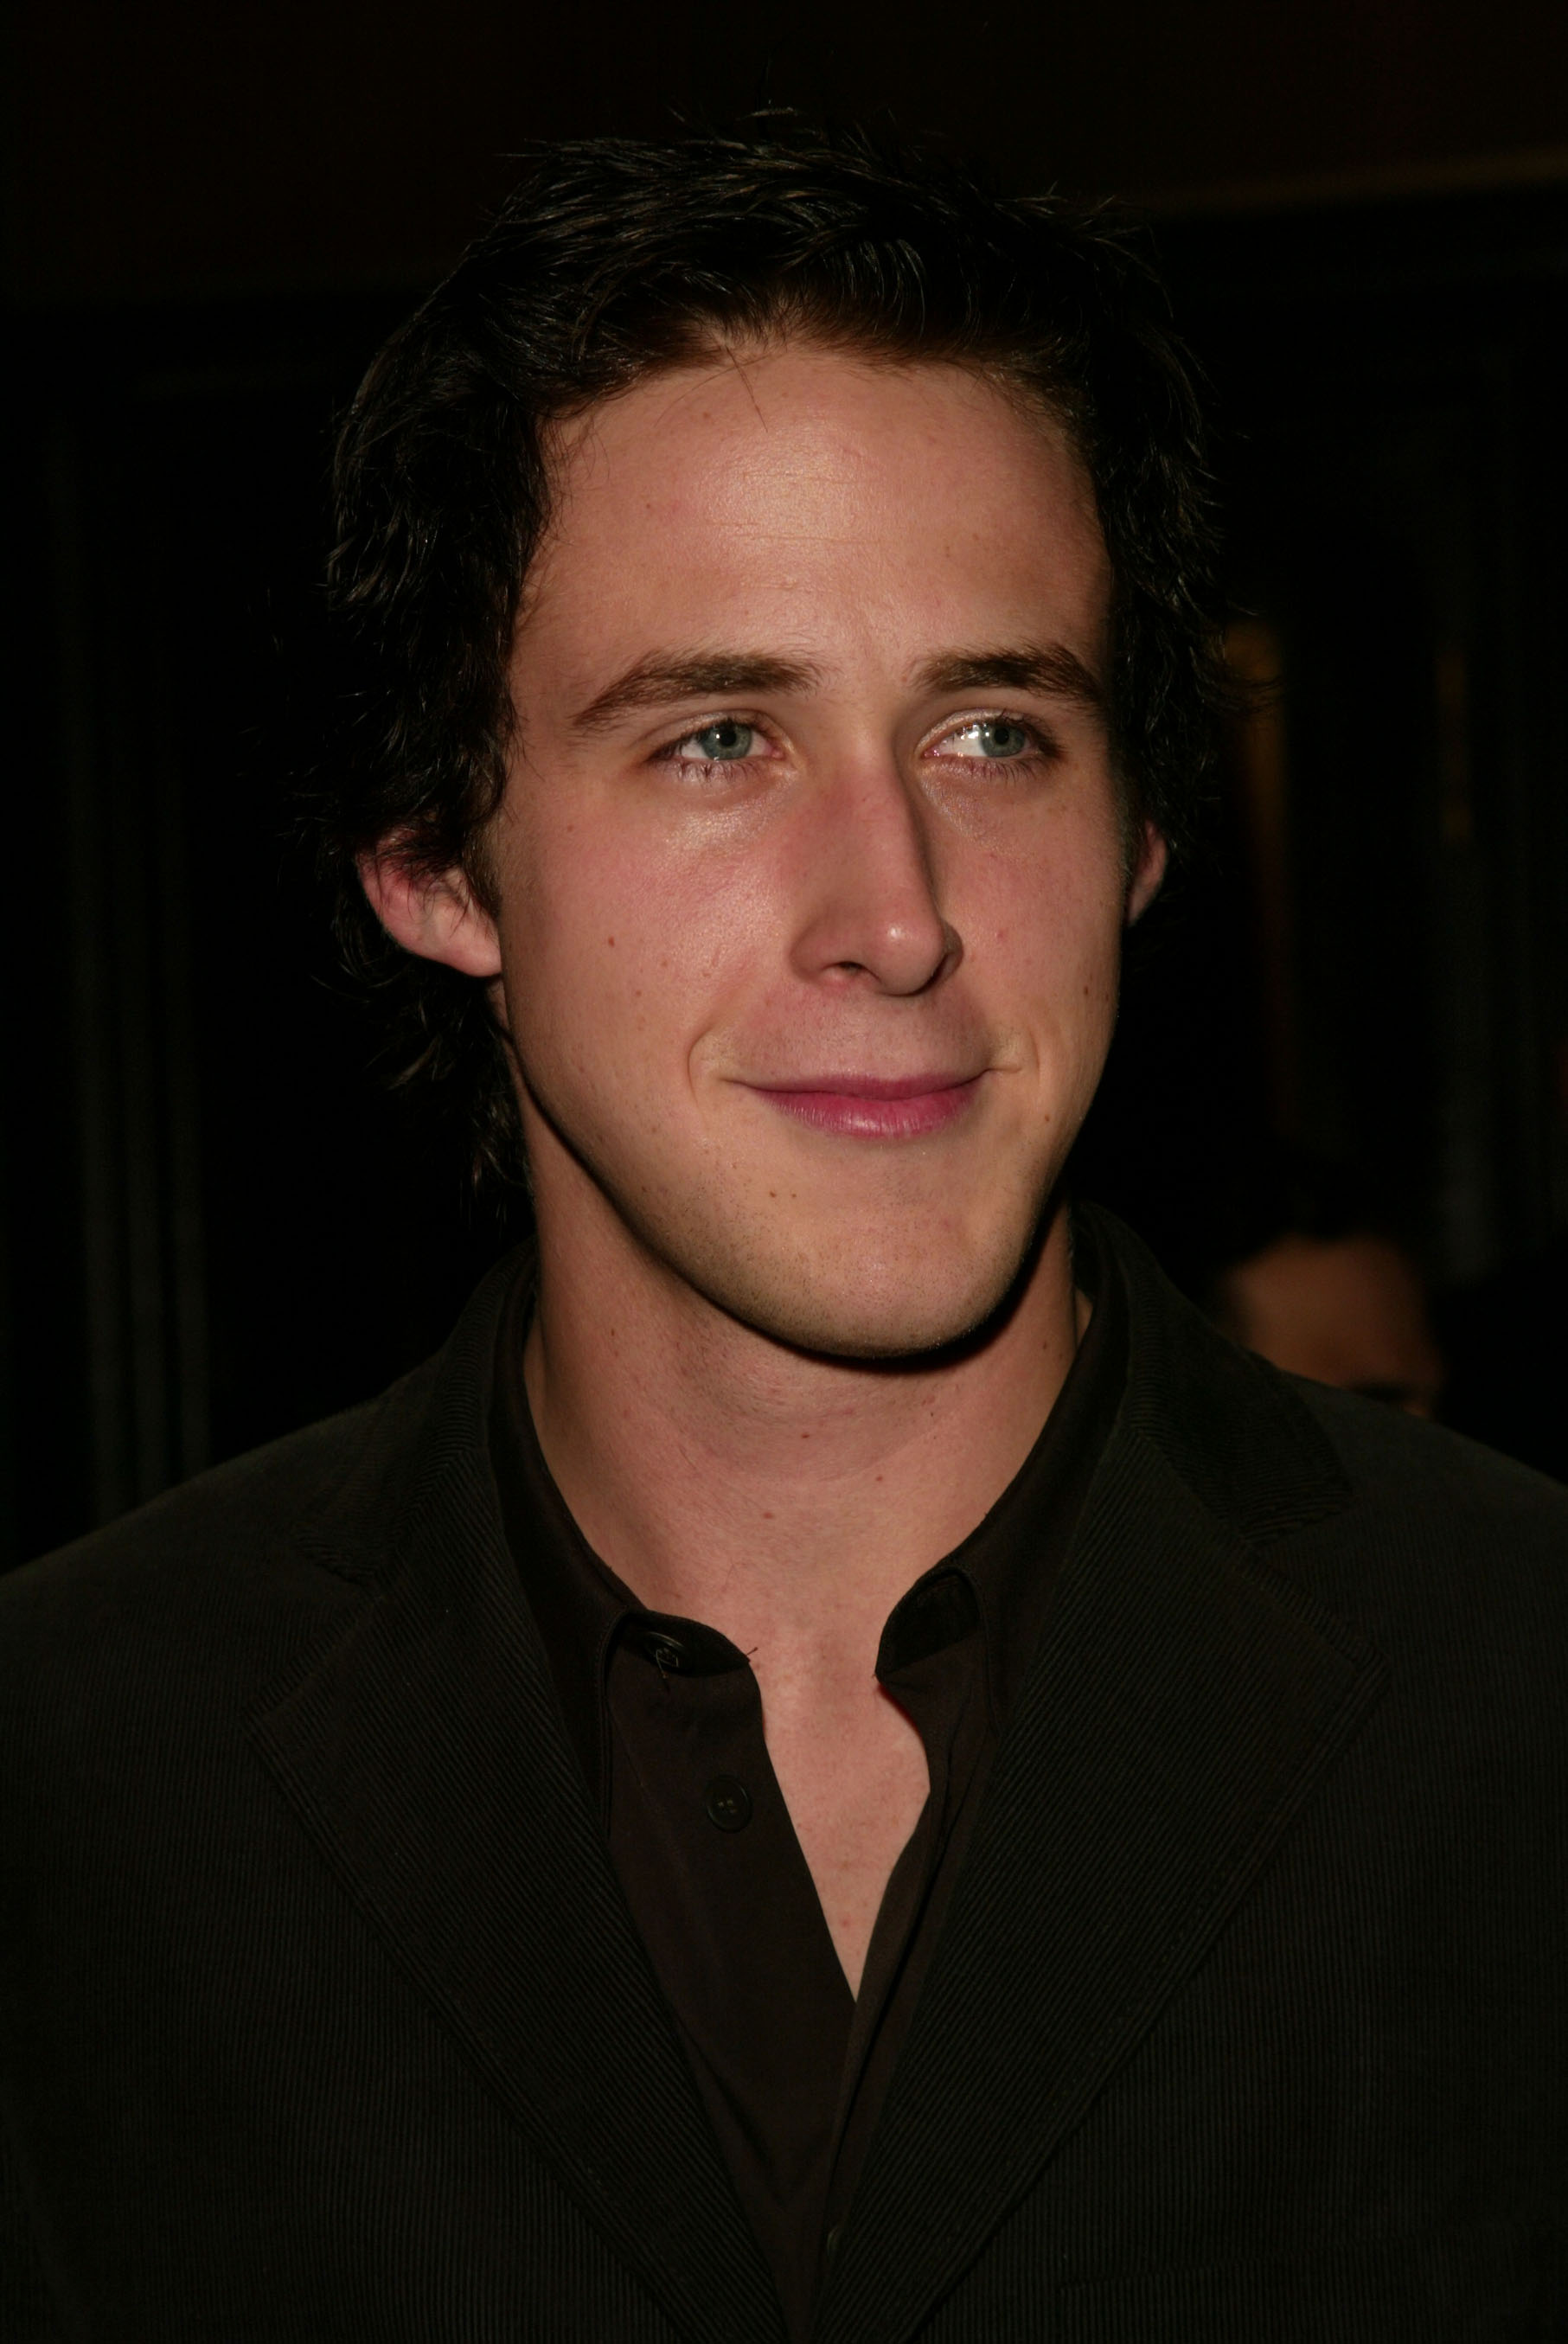 Ryan Gosling at the "Murder By Numbers" film premiere at the Ziegfeld Theatre in New York City on April 16, 2002 | Source: Getty Images